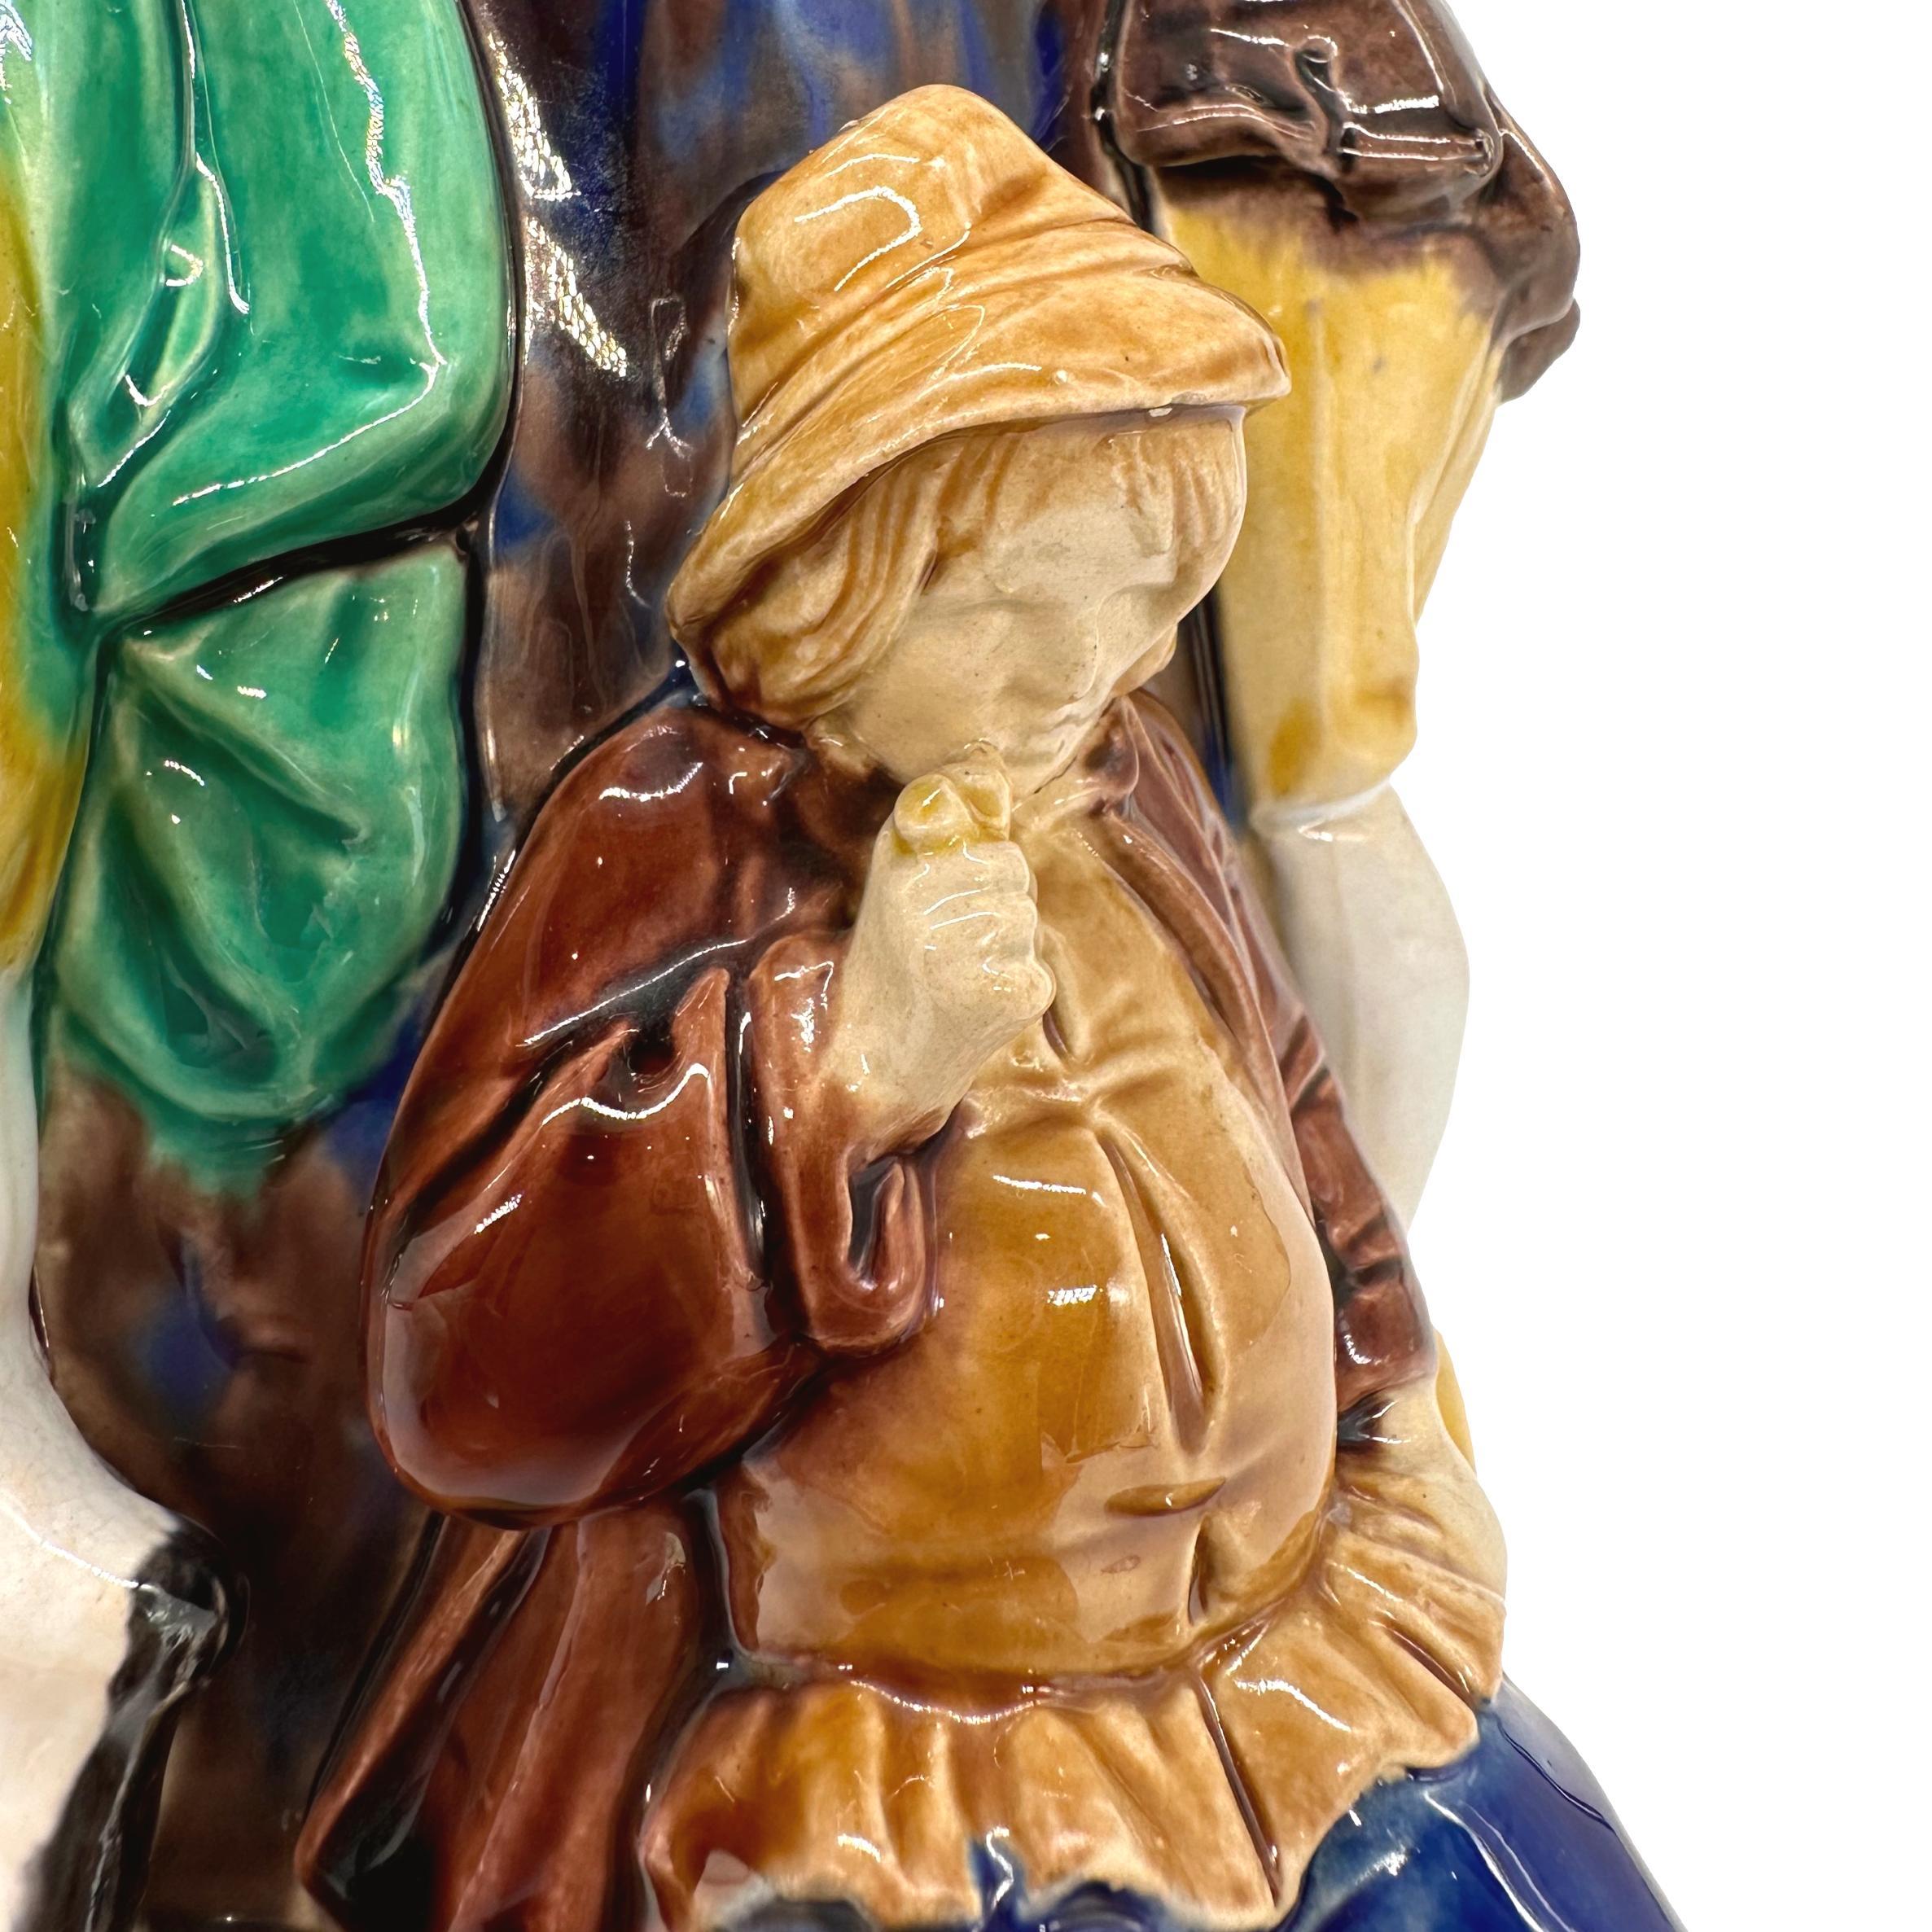 A Minton Majolica Ale Jug with Five Revelers in Medieval Dress, dated 1862 For Sale 3